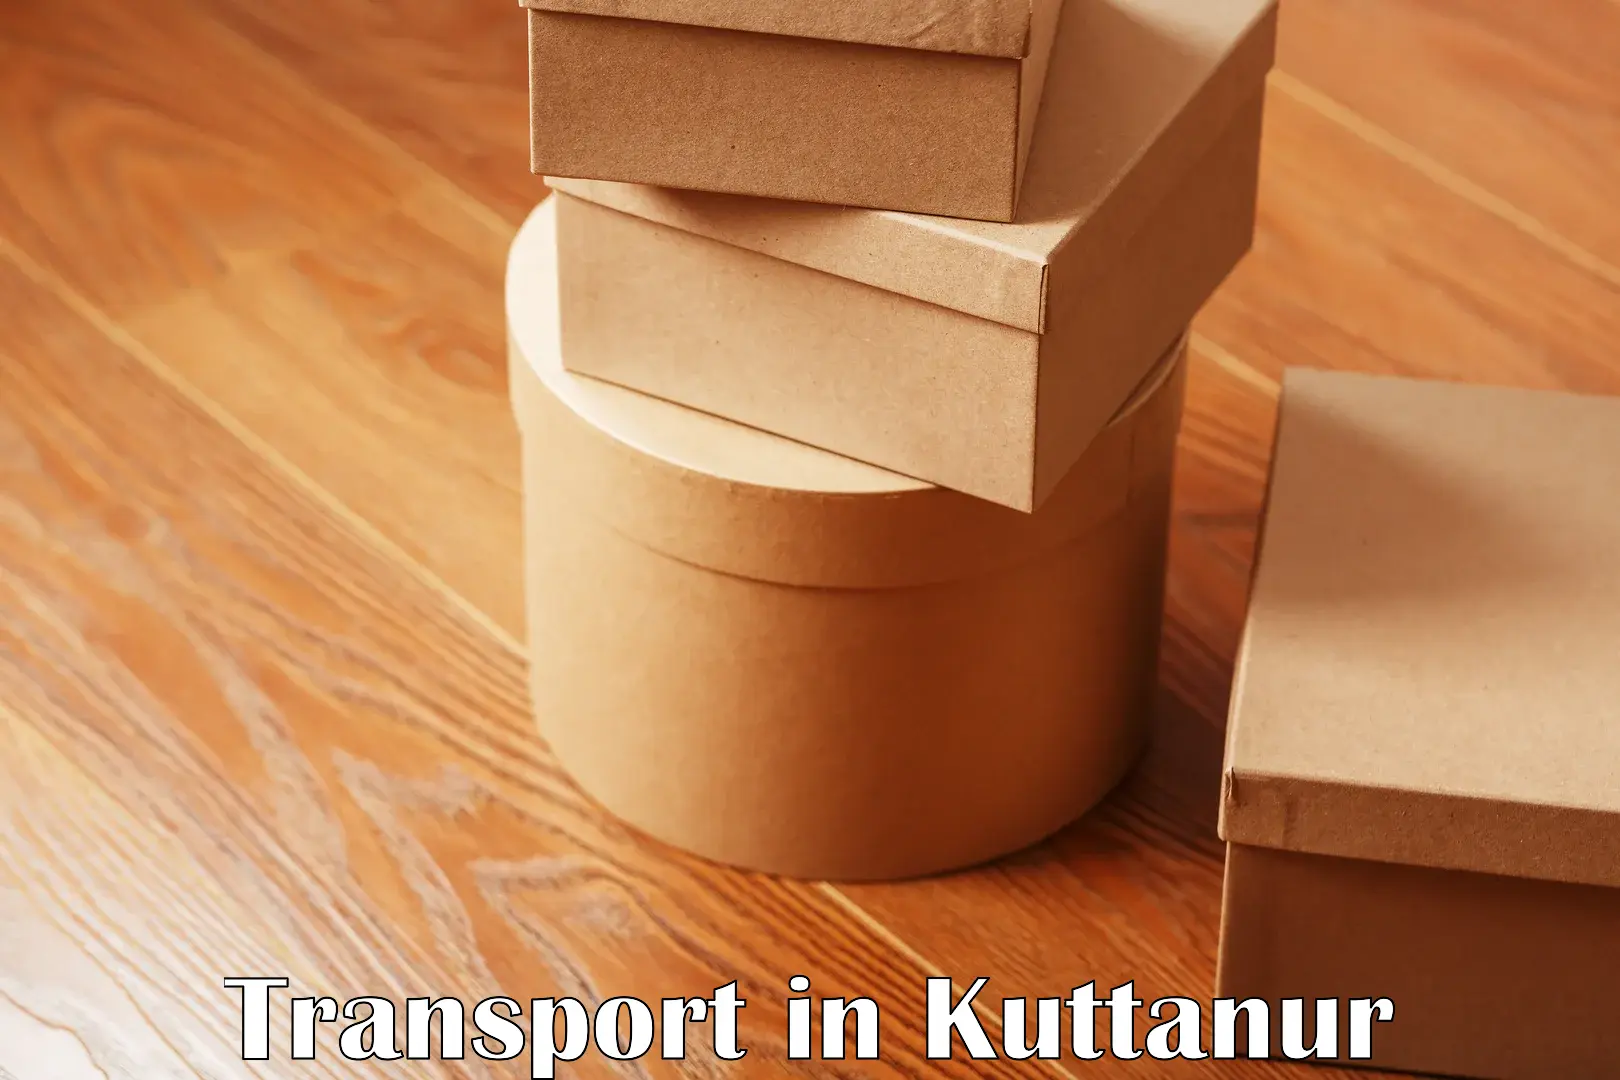 Transport shared services in Kuttanur